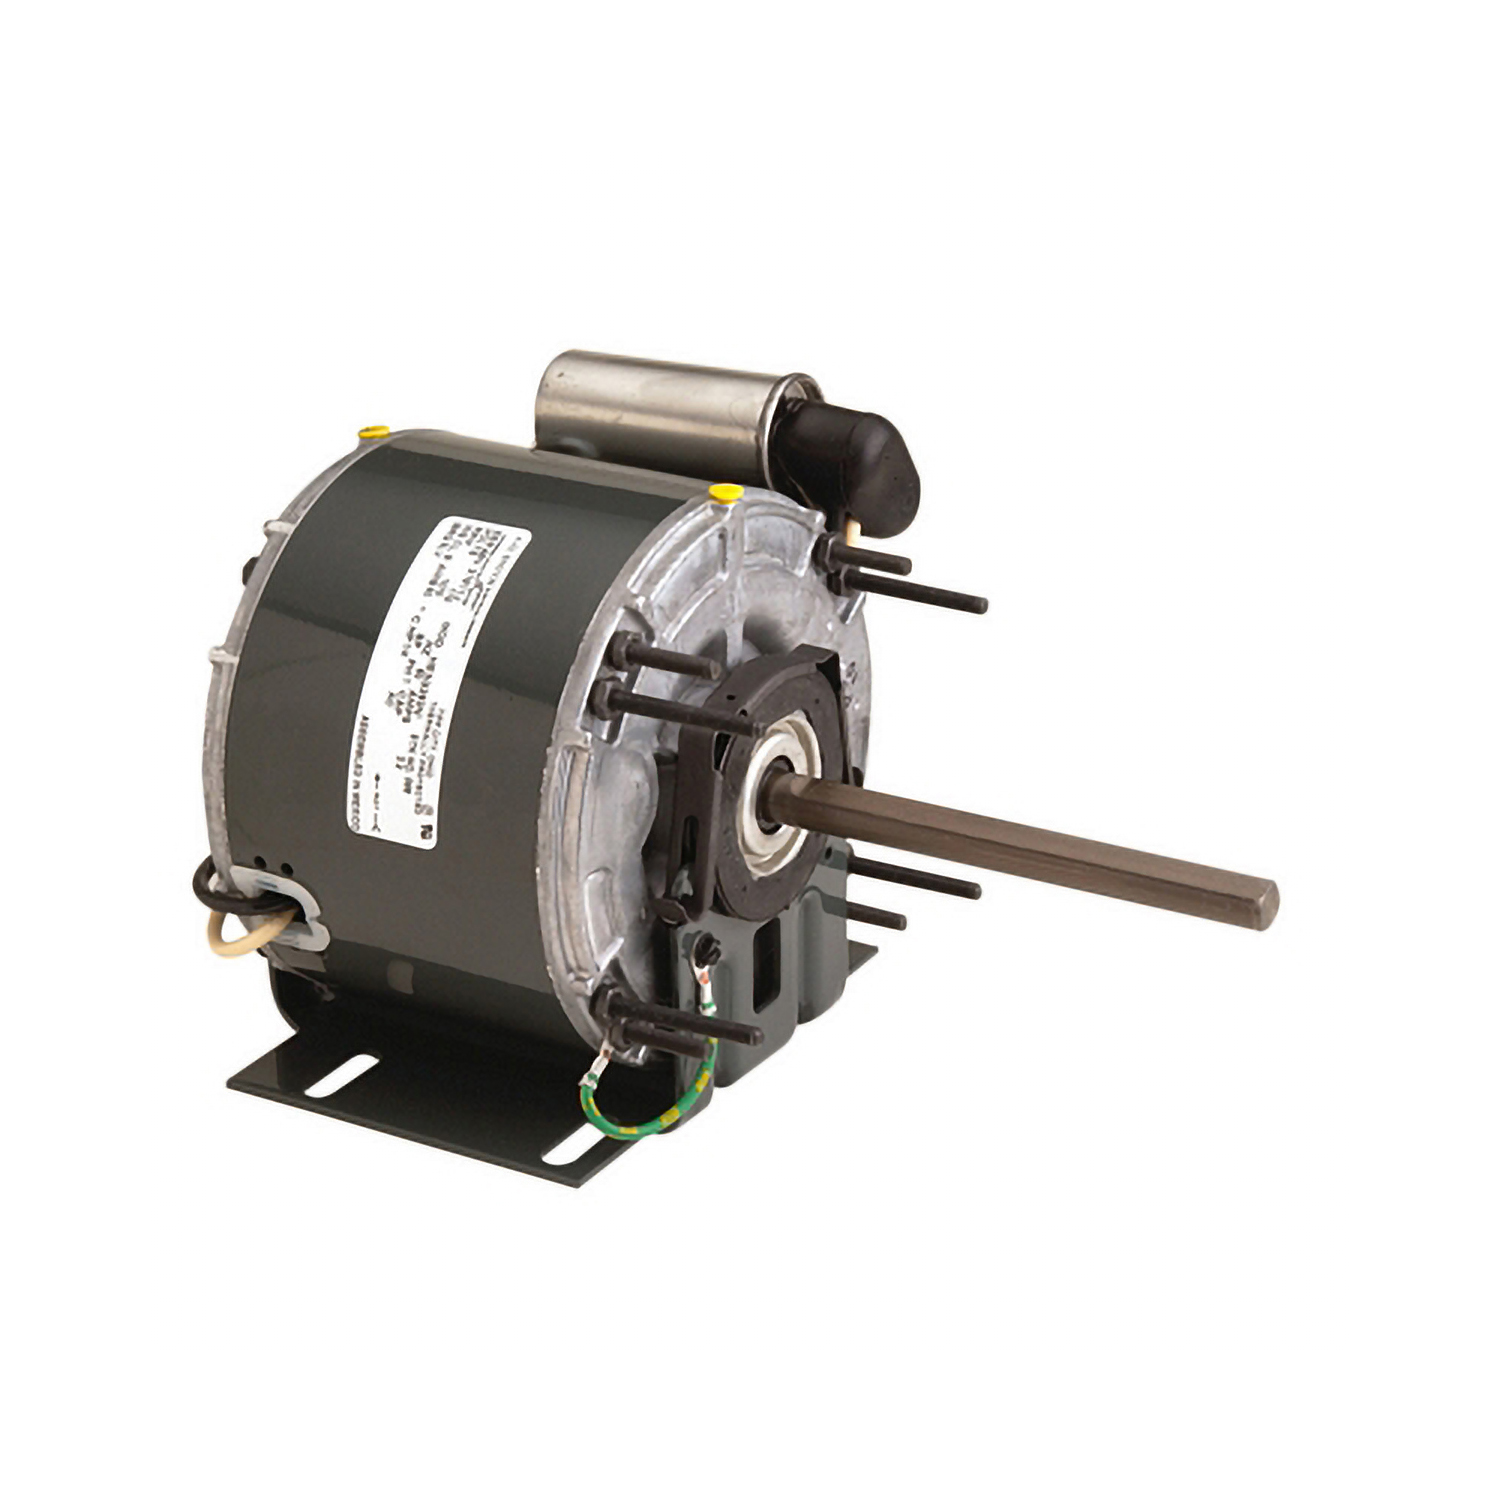 5-5/8 In Dia Totally Enclosed Fan/Blower Motor 115 Volts 1075 RPM 1/4 H.P.